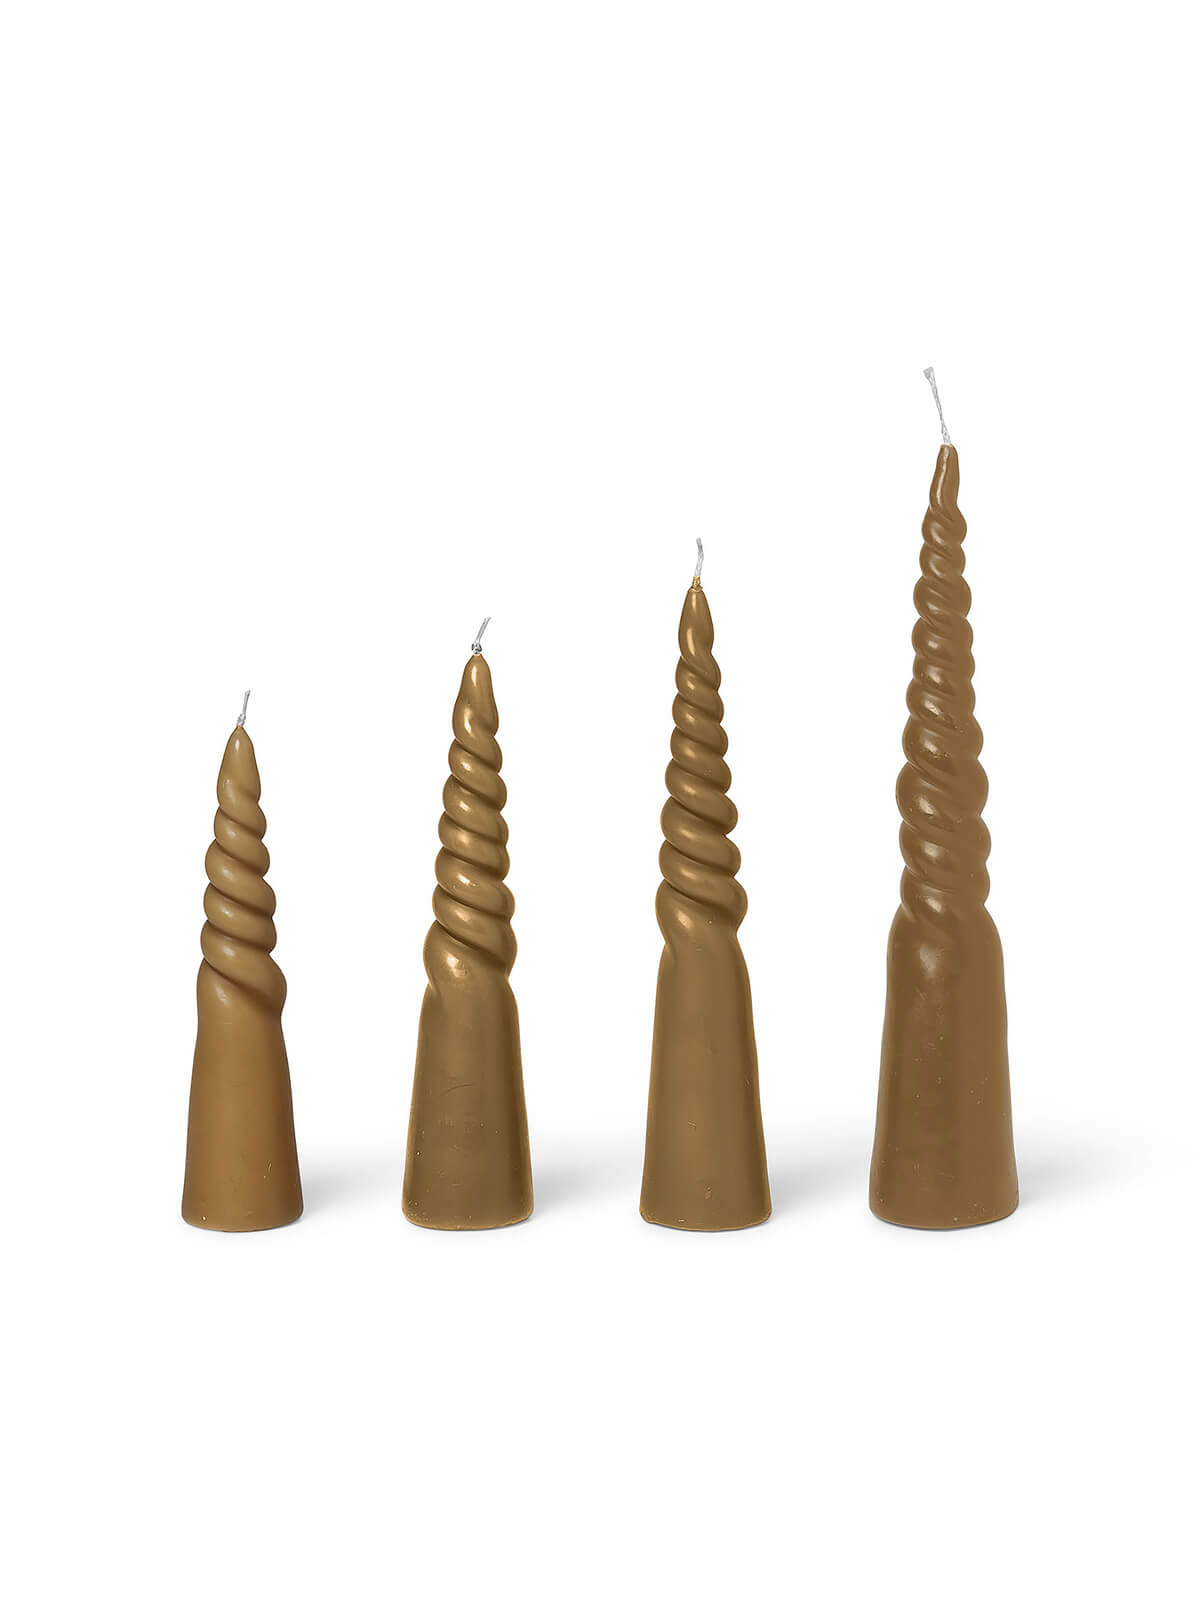 Twisted Candles | Set of 4 | Straw | by ferm Living - Lifestory - ferm LIVING